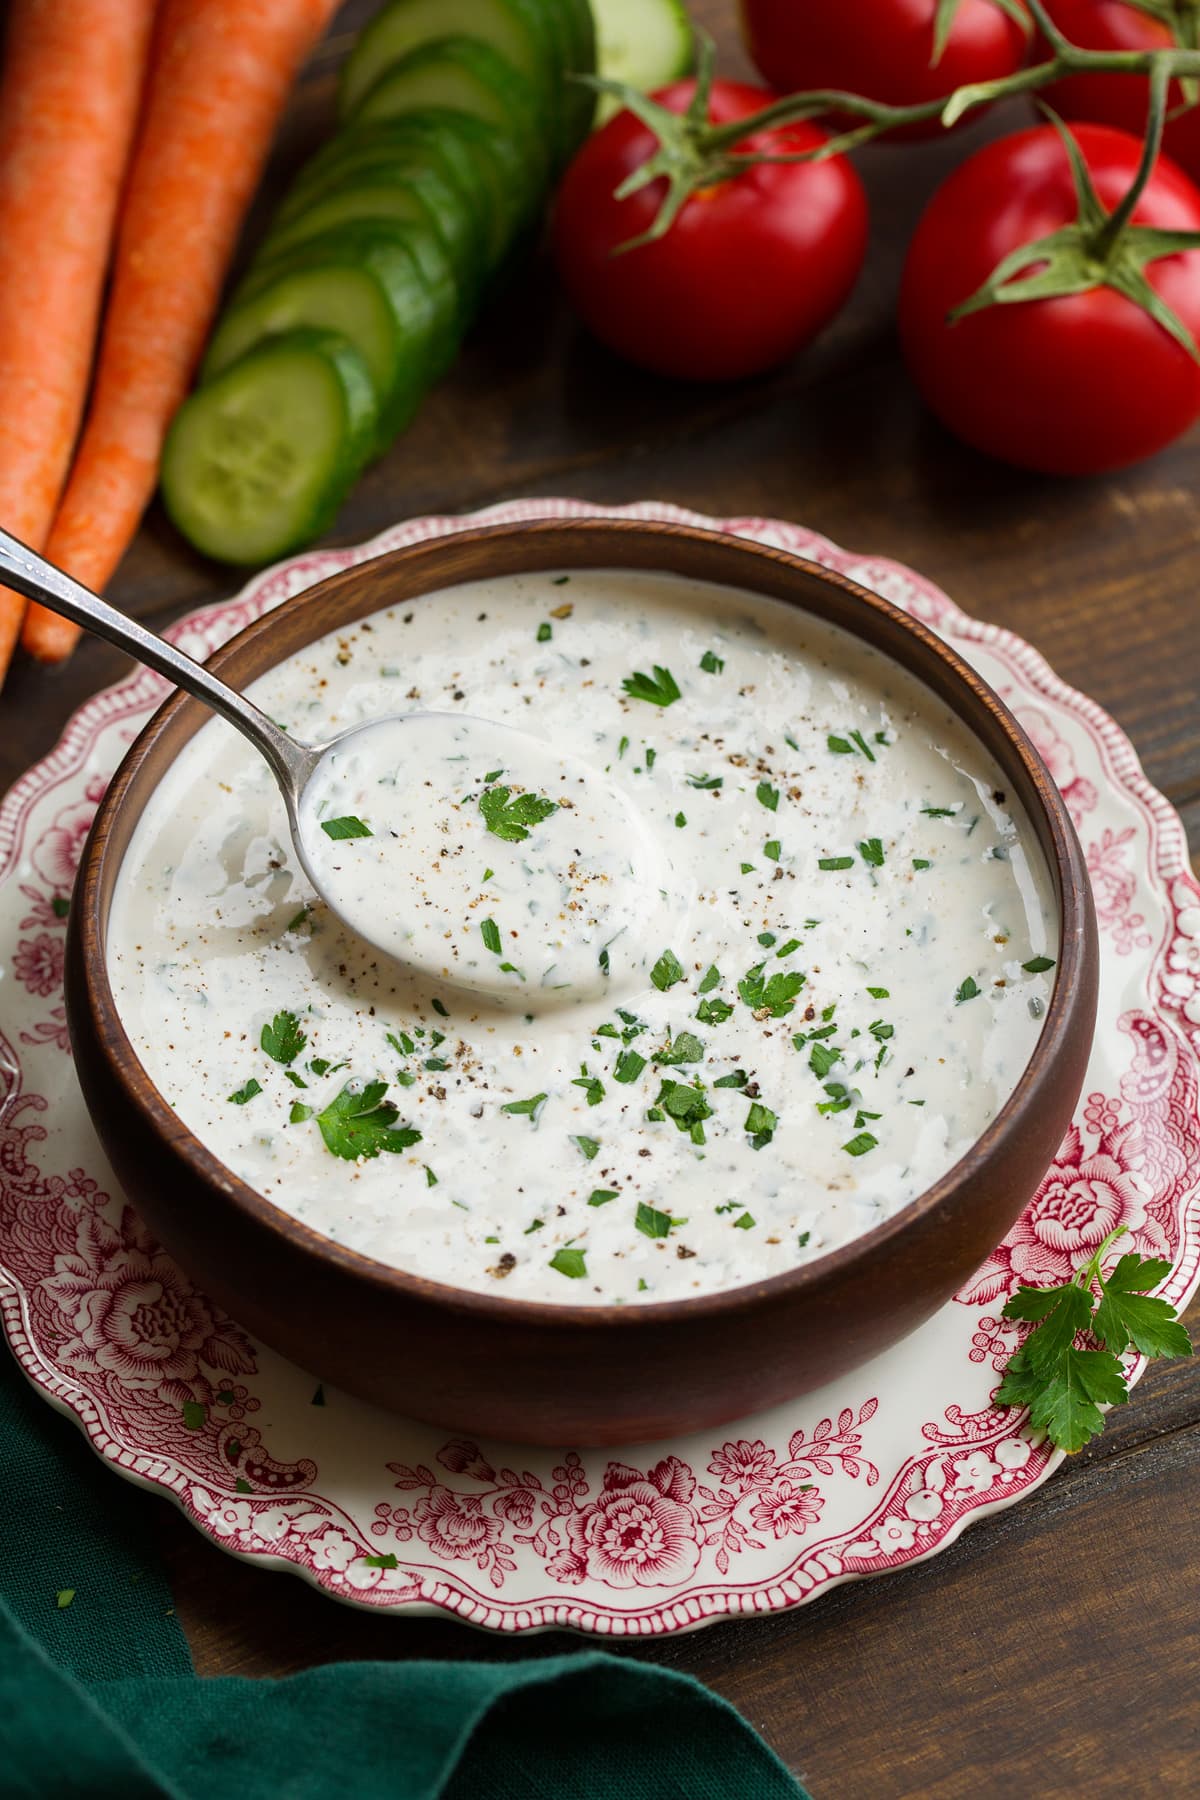 Photo of ranch dressing in a wooden bowl with fresh veggies in the background.